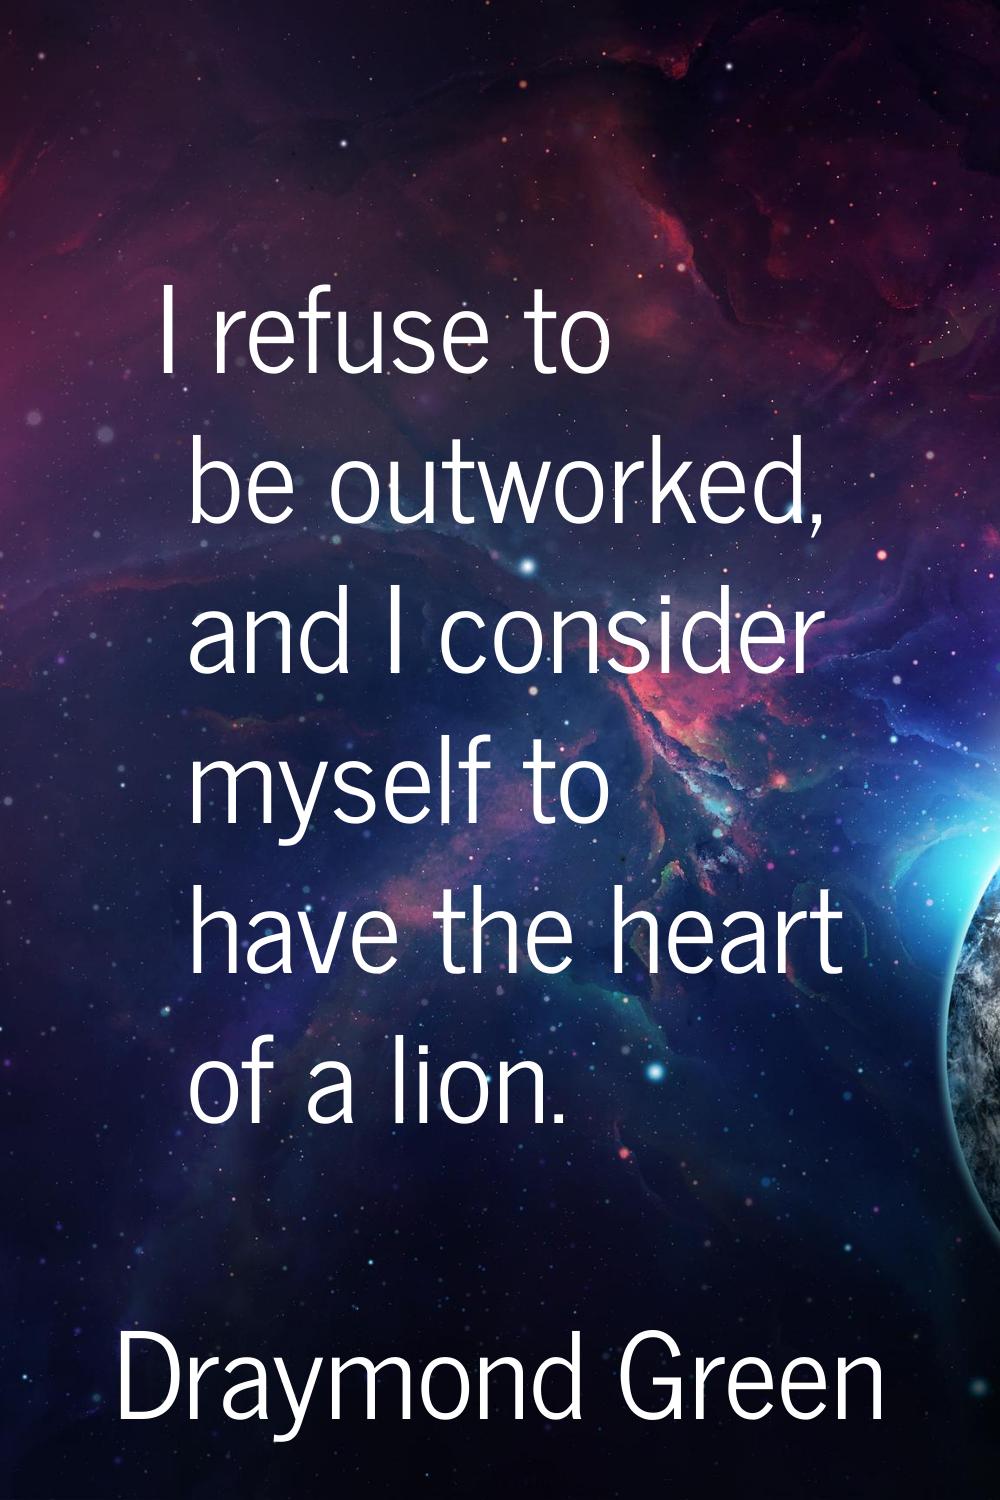 I refuse to be outworked, and I consider myself to have the heart of a lion.